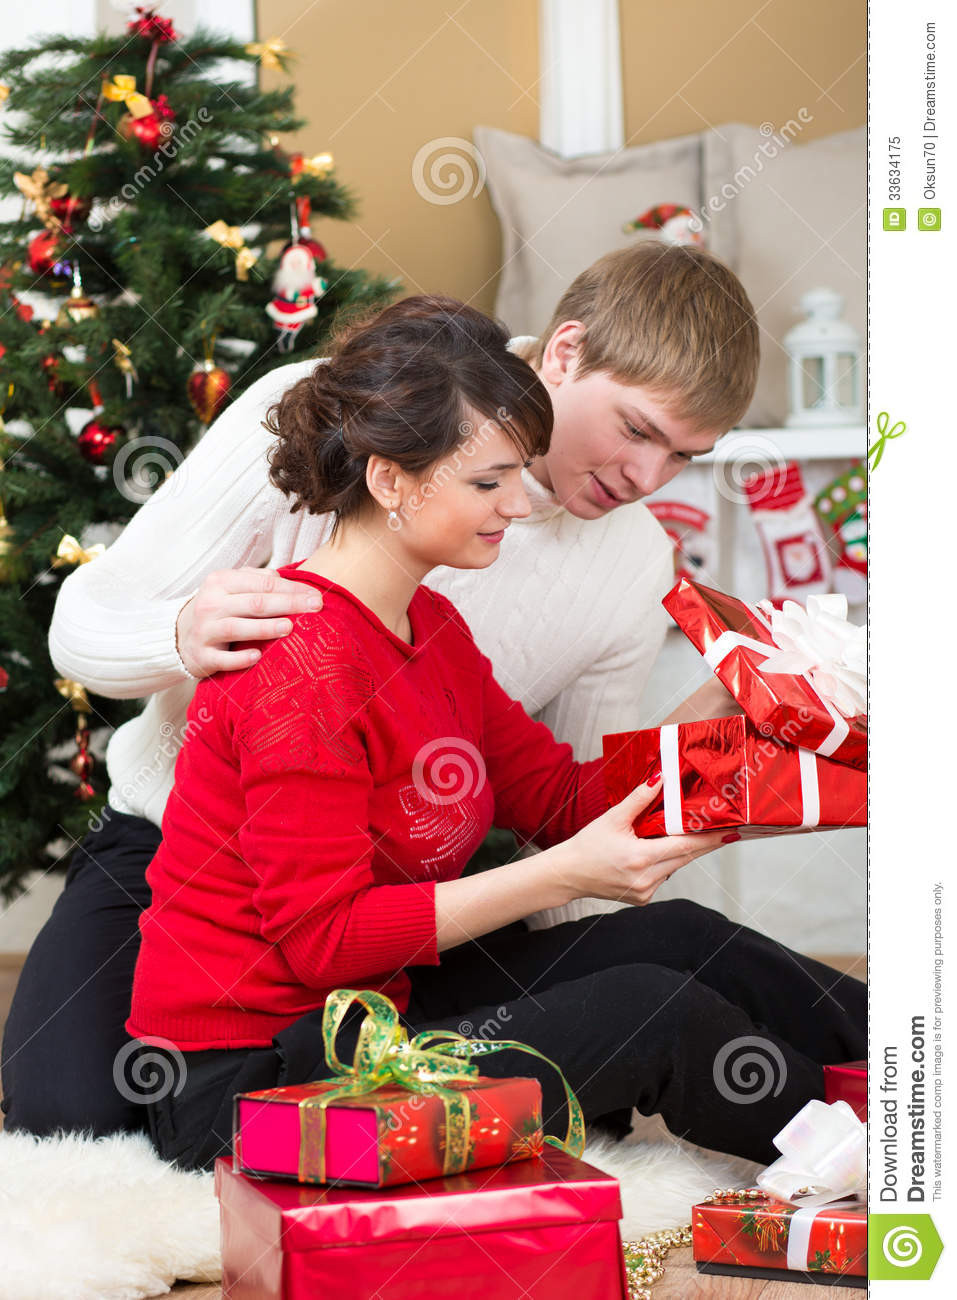 Gift Ideas For Young Couples
 Young Couple With Gifts In Front Christmas Tree Royalty